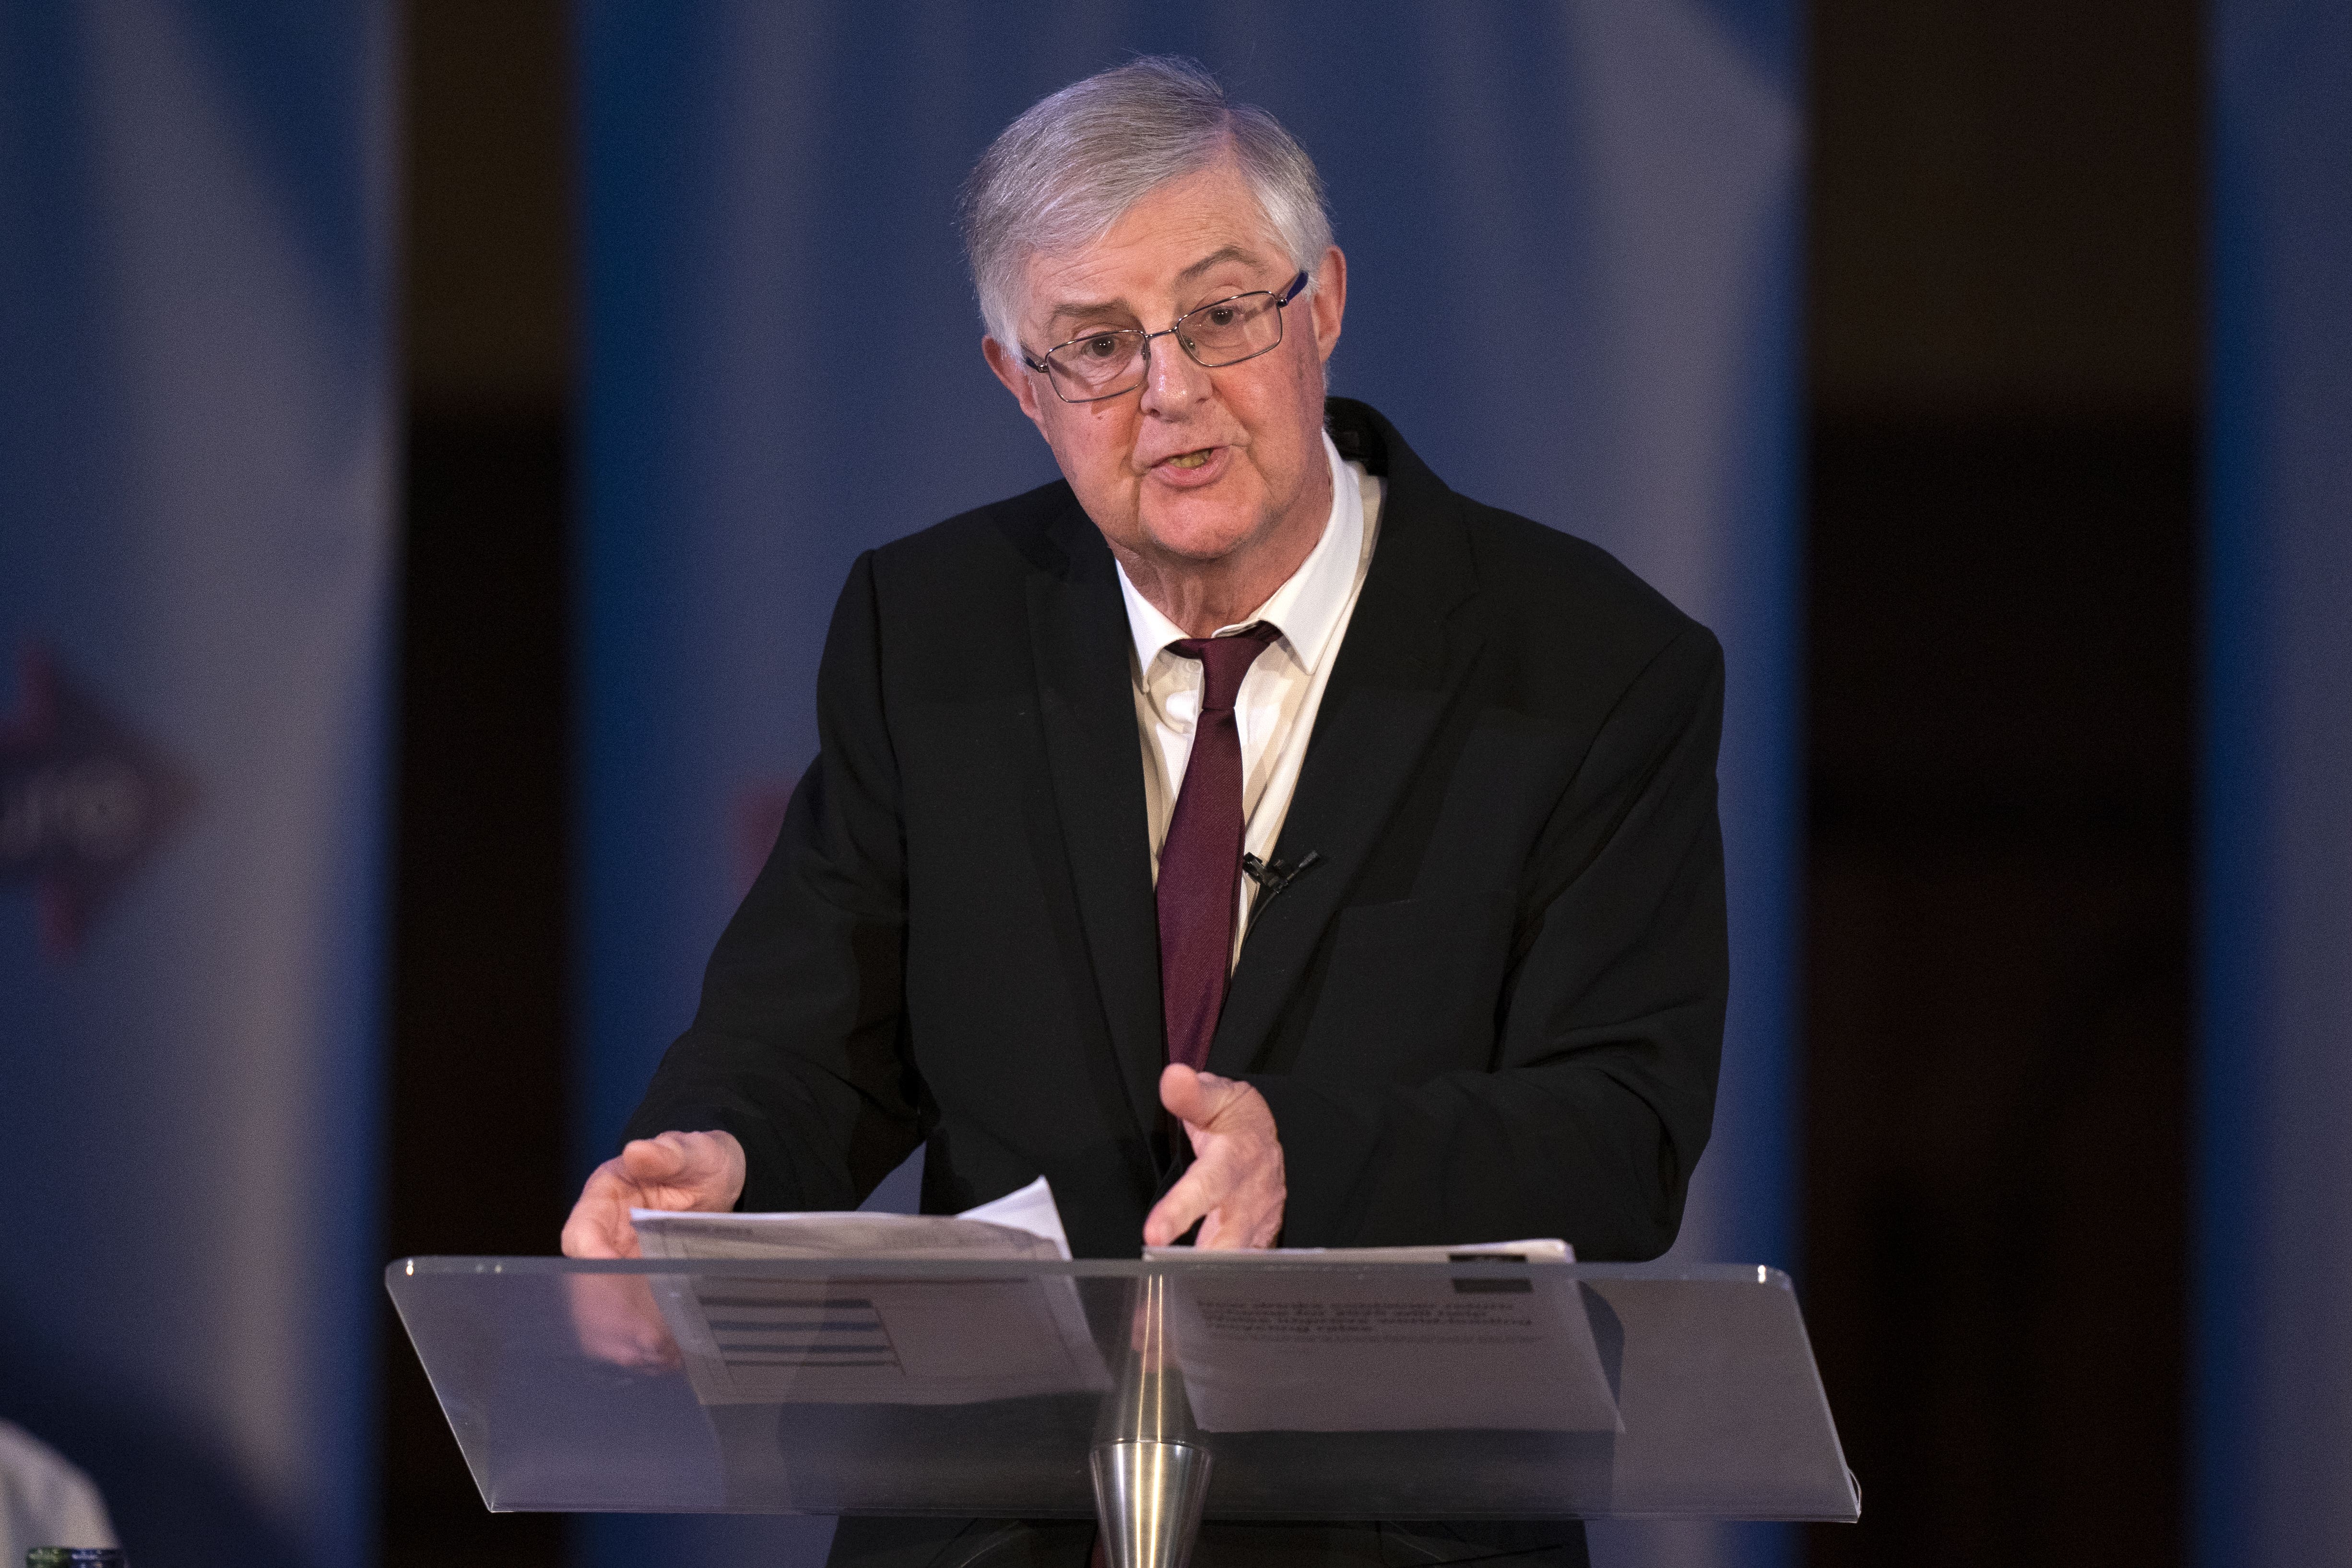 Welsh First Minister Mark Drakeford has said he will leave the Welsh Parliament at the next election (Jane Barlow/PA)